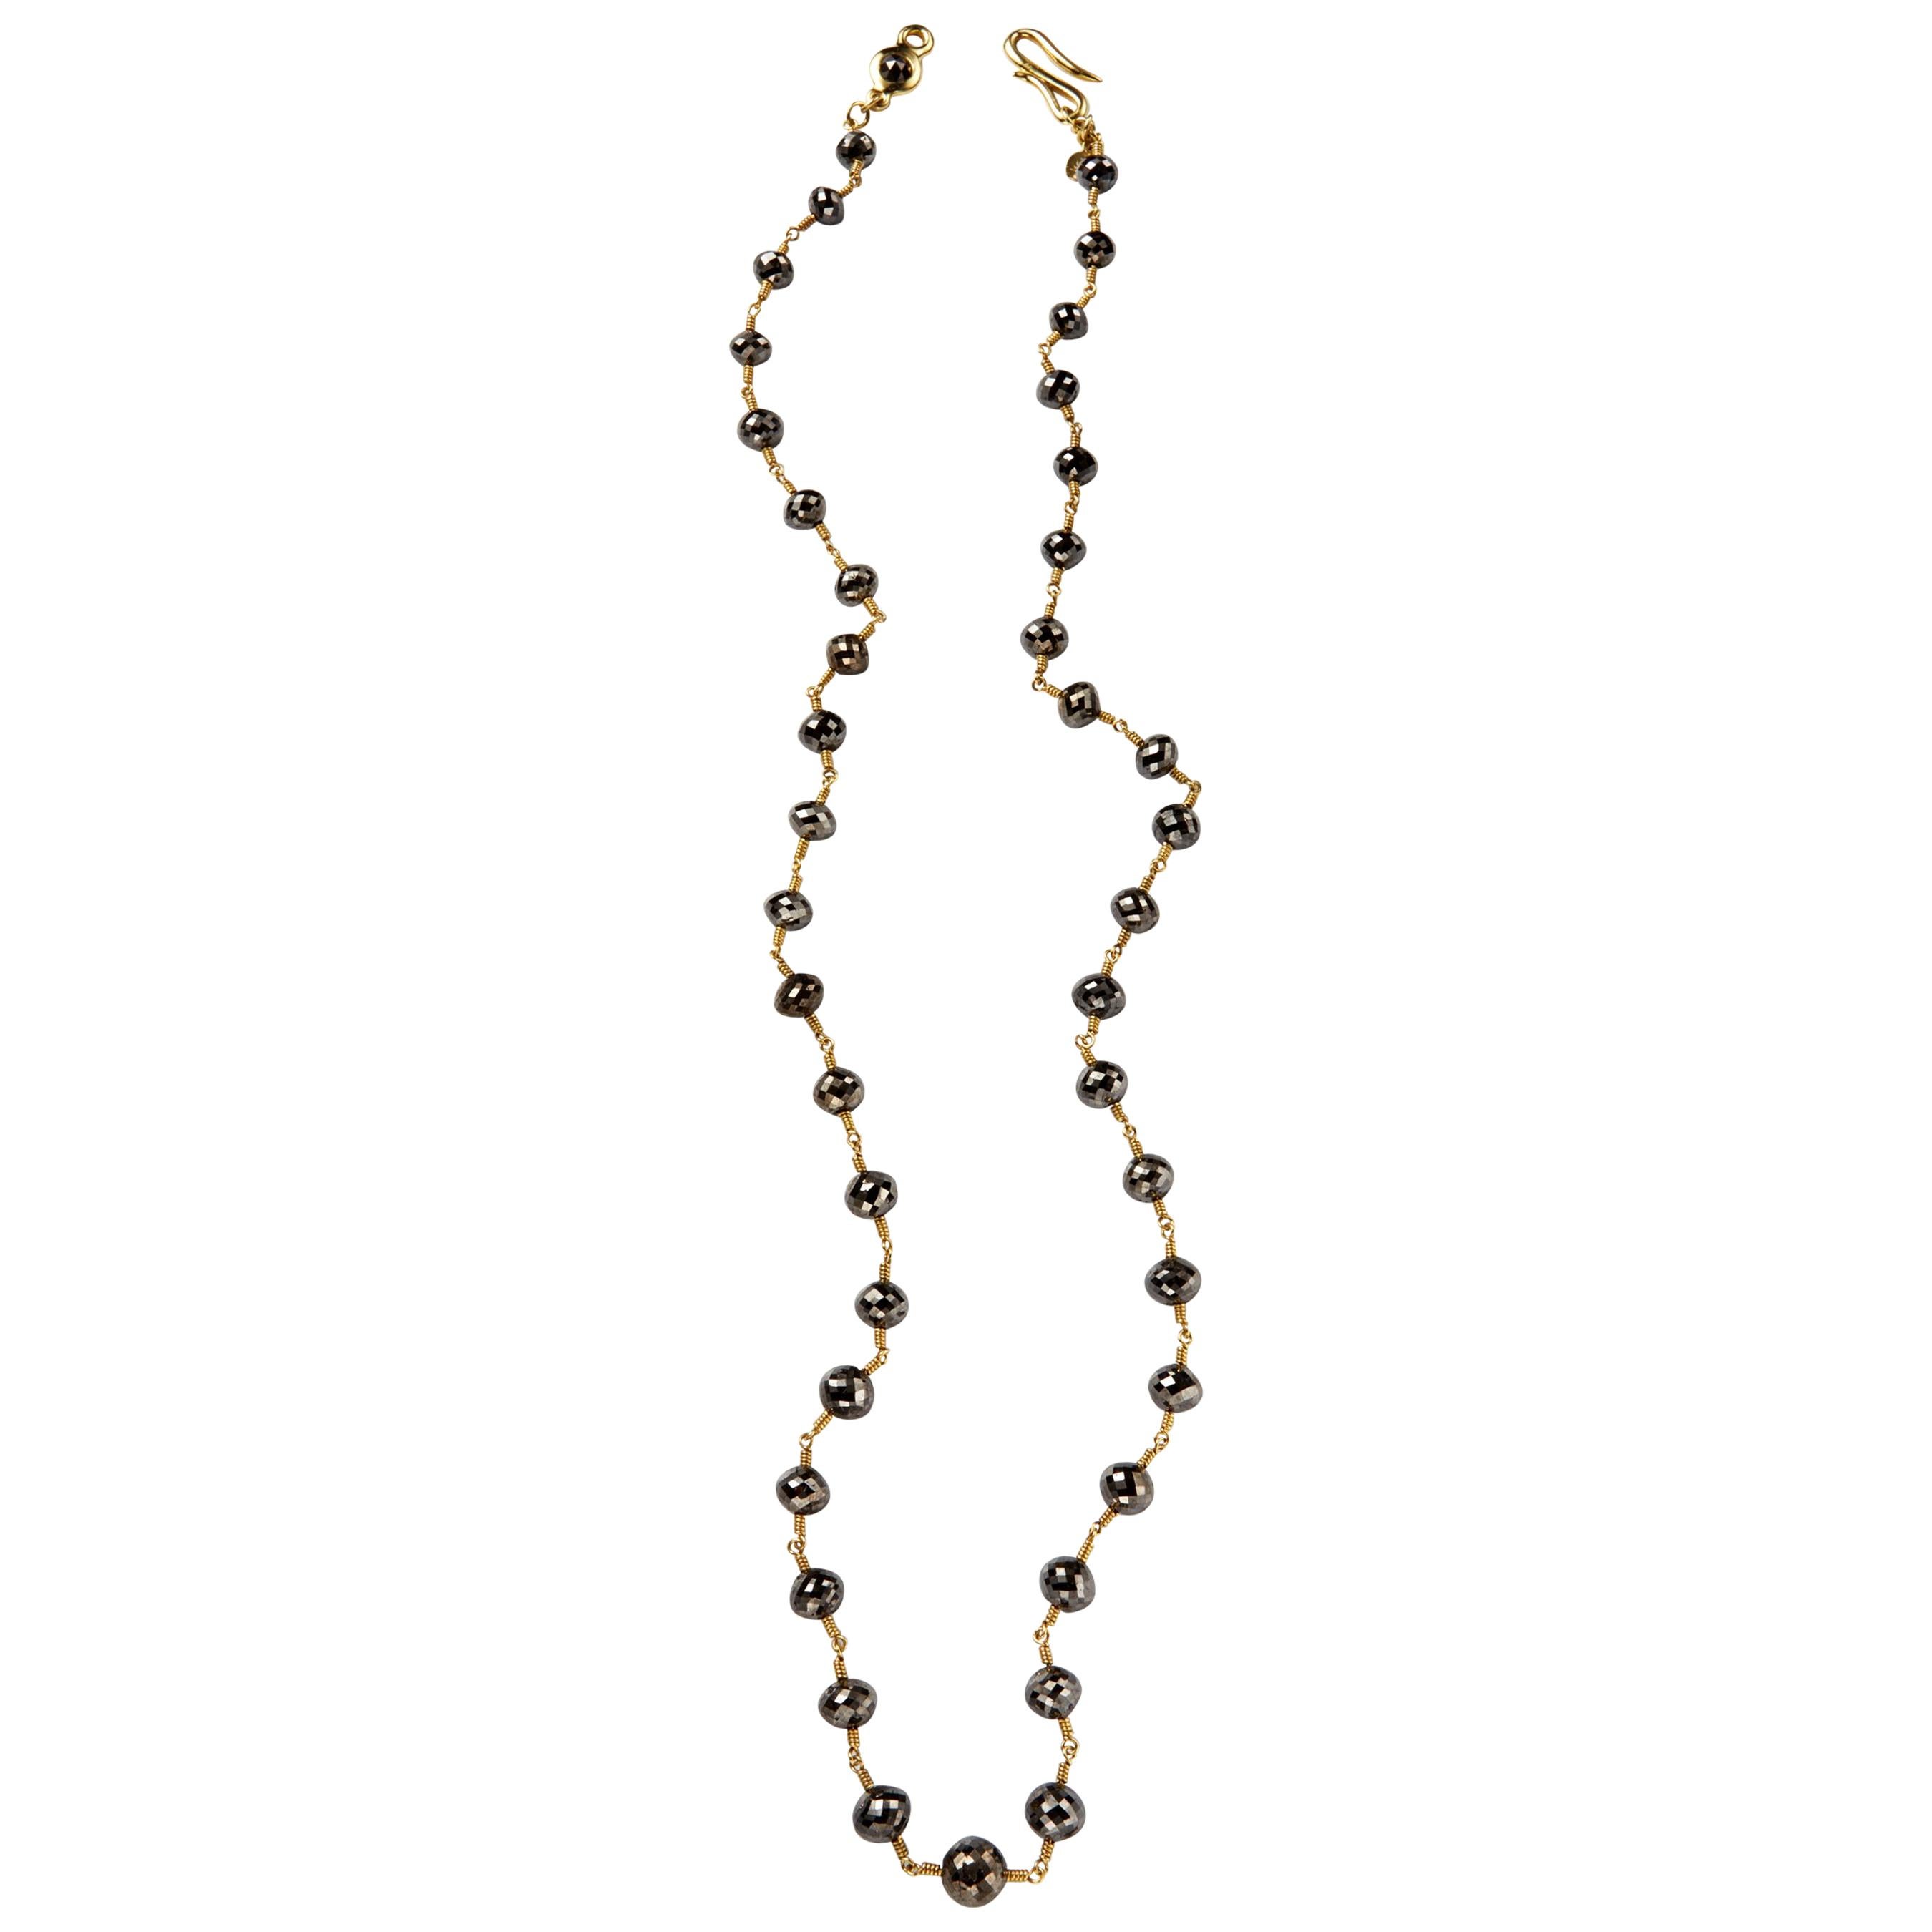 Faceted Black Diamond 18K Gold Necklace By Christopher Phelan